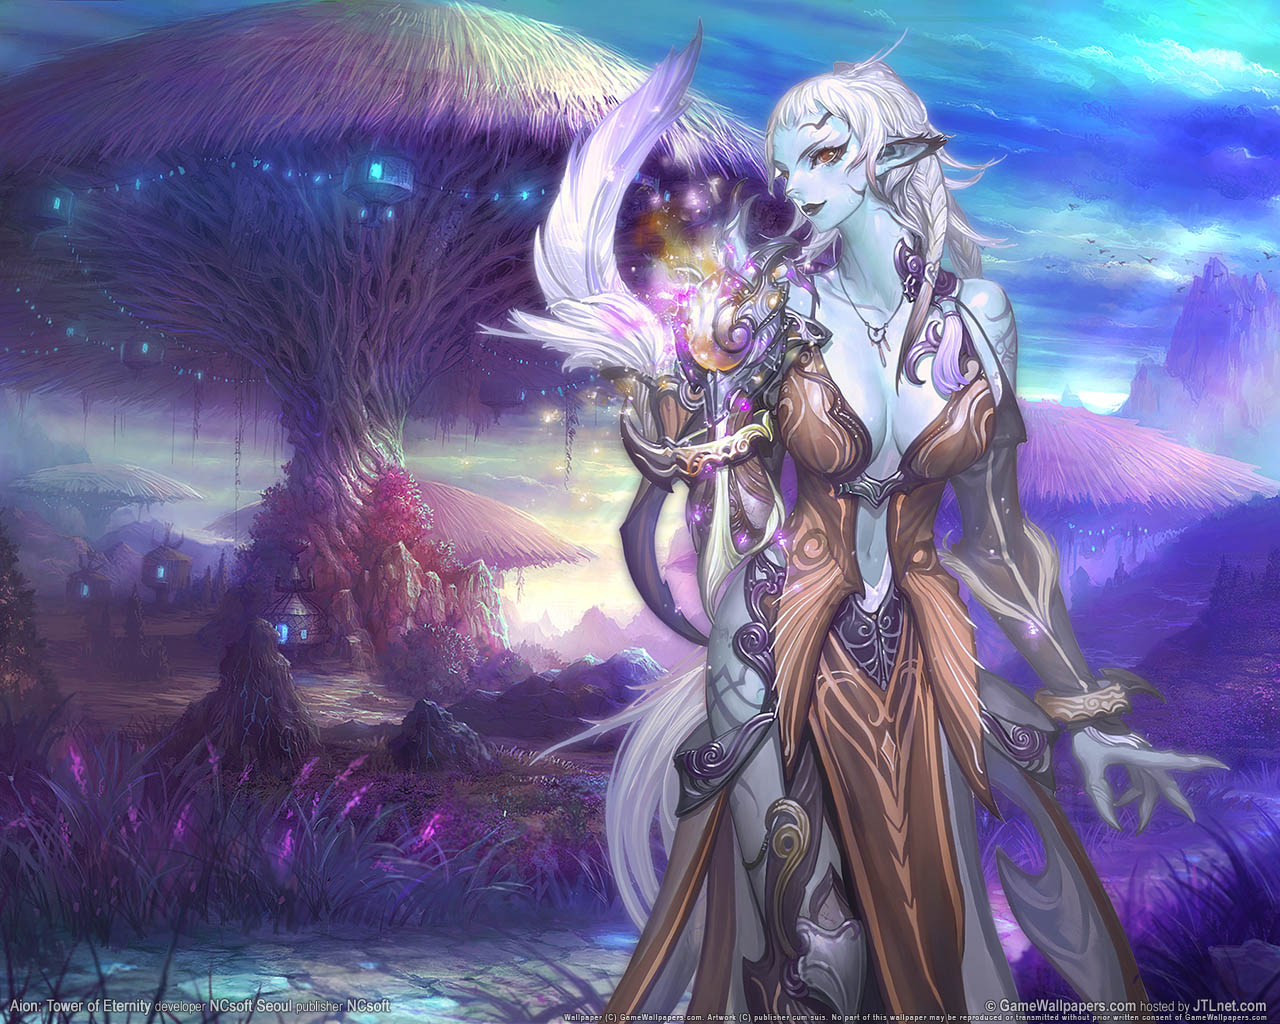 Aion%253A Tower of Eternity achtergrond 10 1280x1024